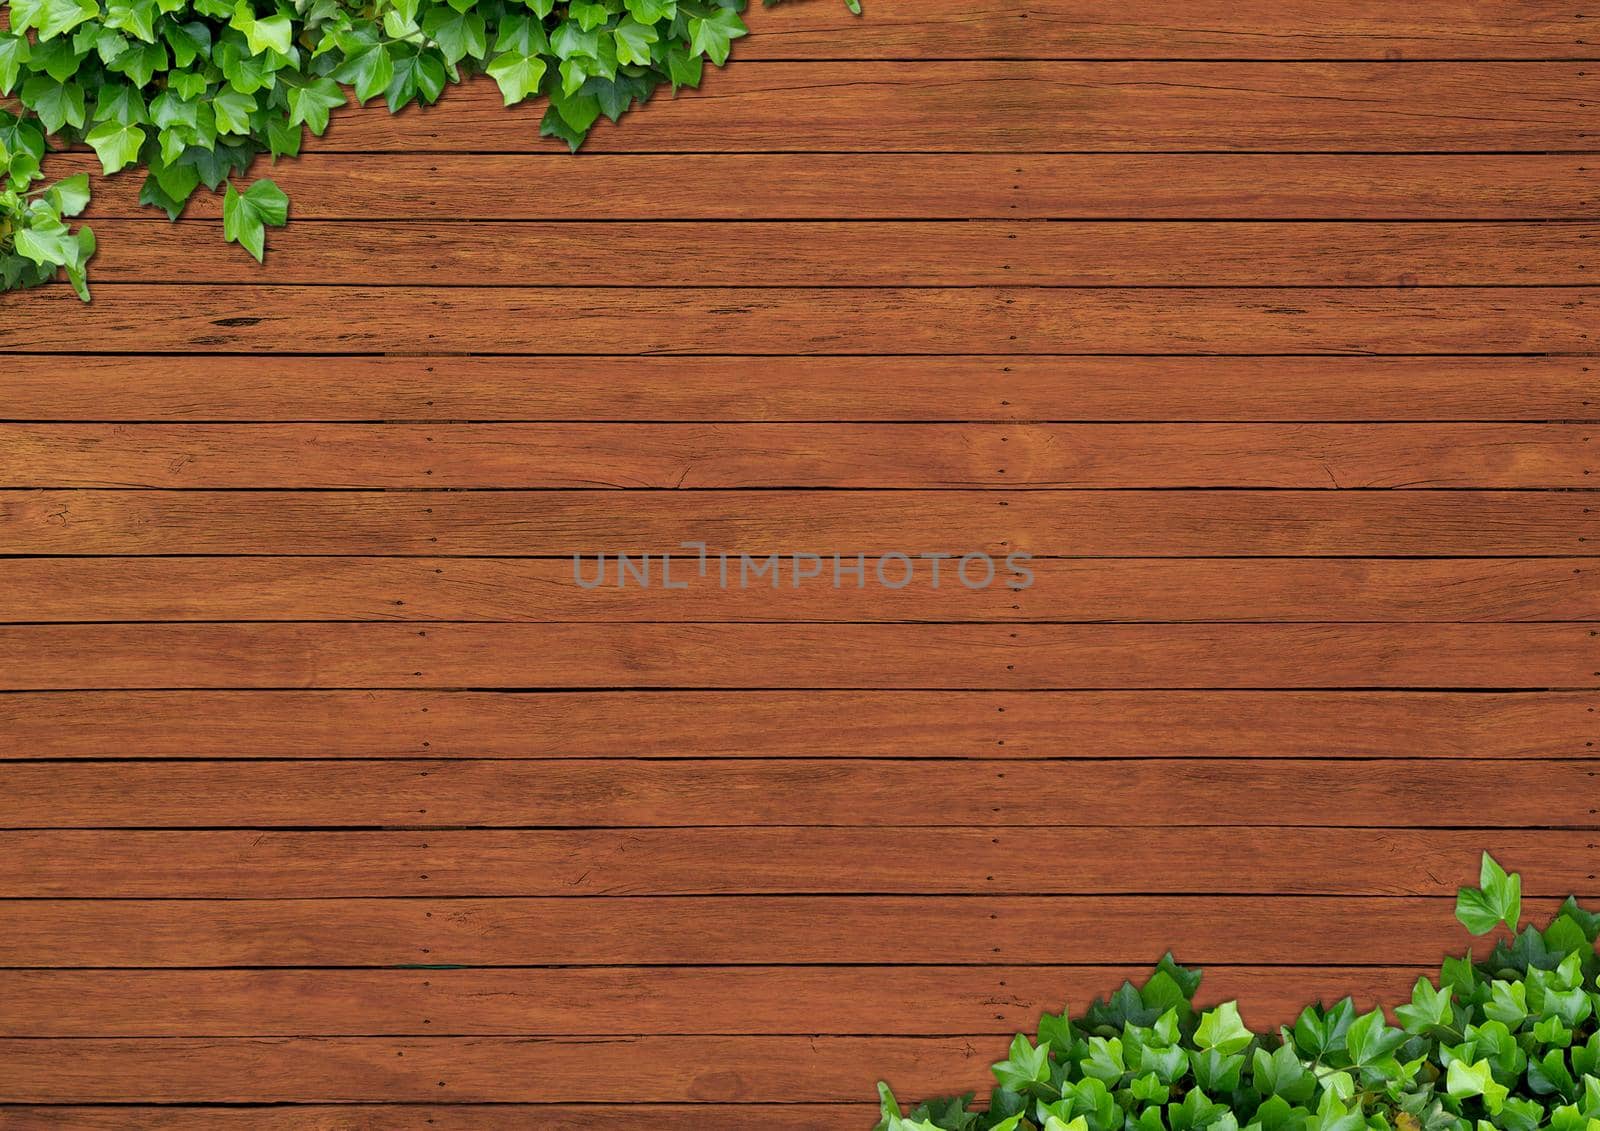 Wooden background image by barks